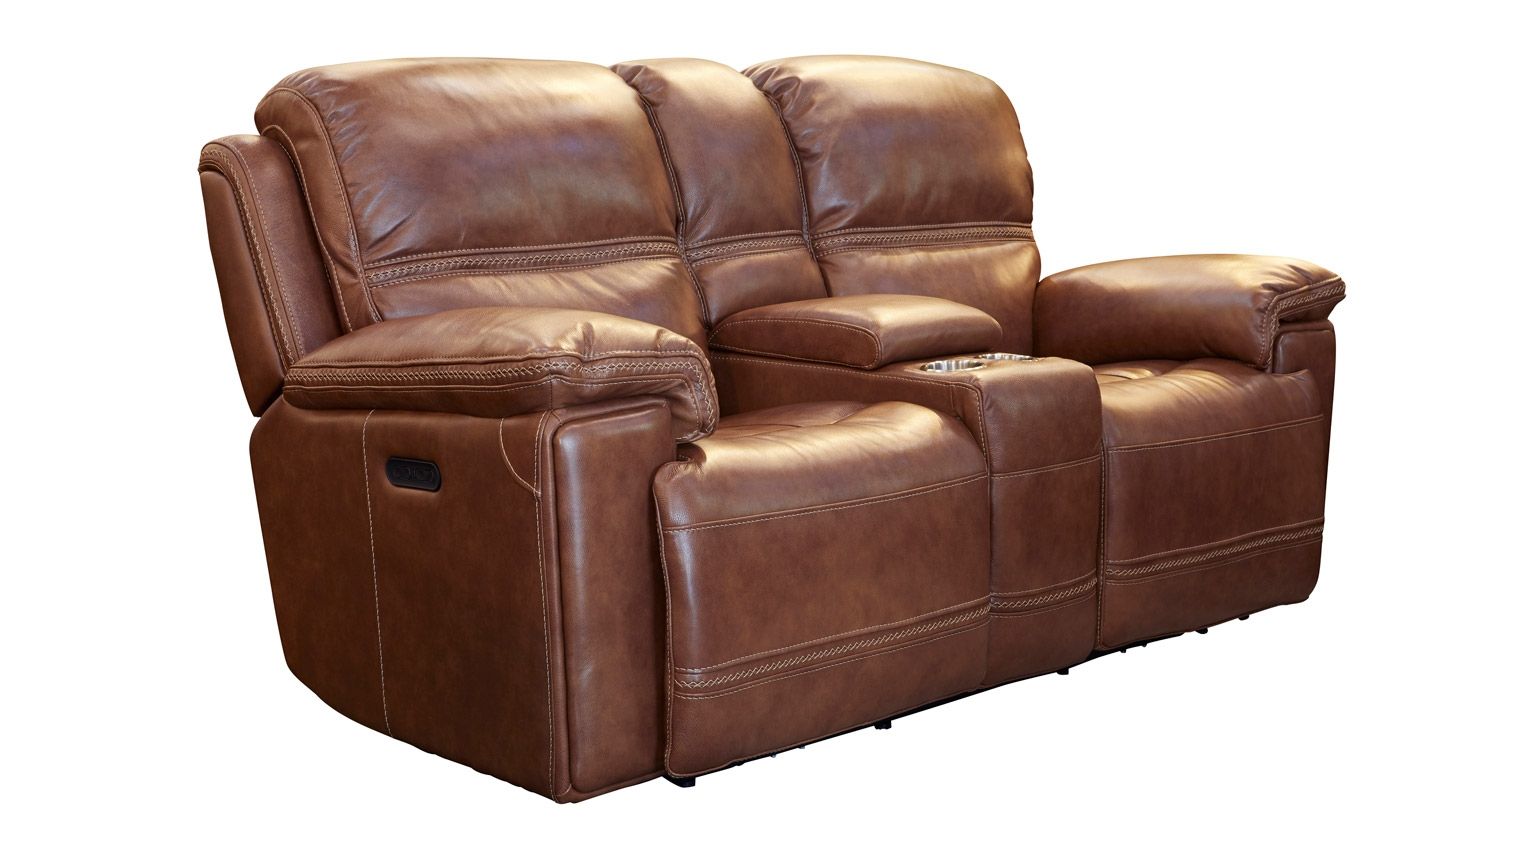 Secretariat Brown Power Reclining Loveseat W/console Intended For Expedition Brown Power Reclining Sofas (View 11 of 15)